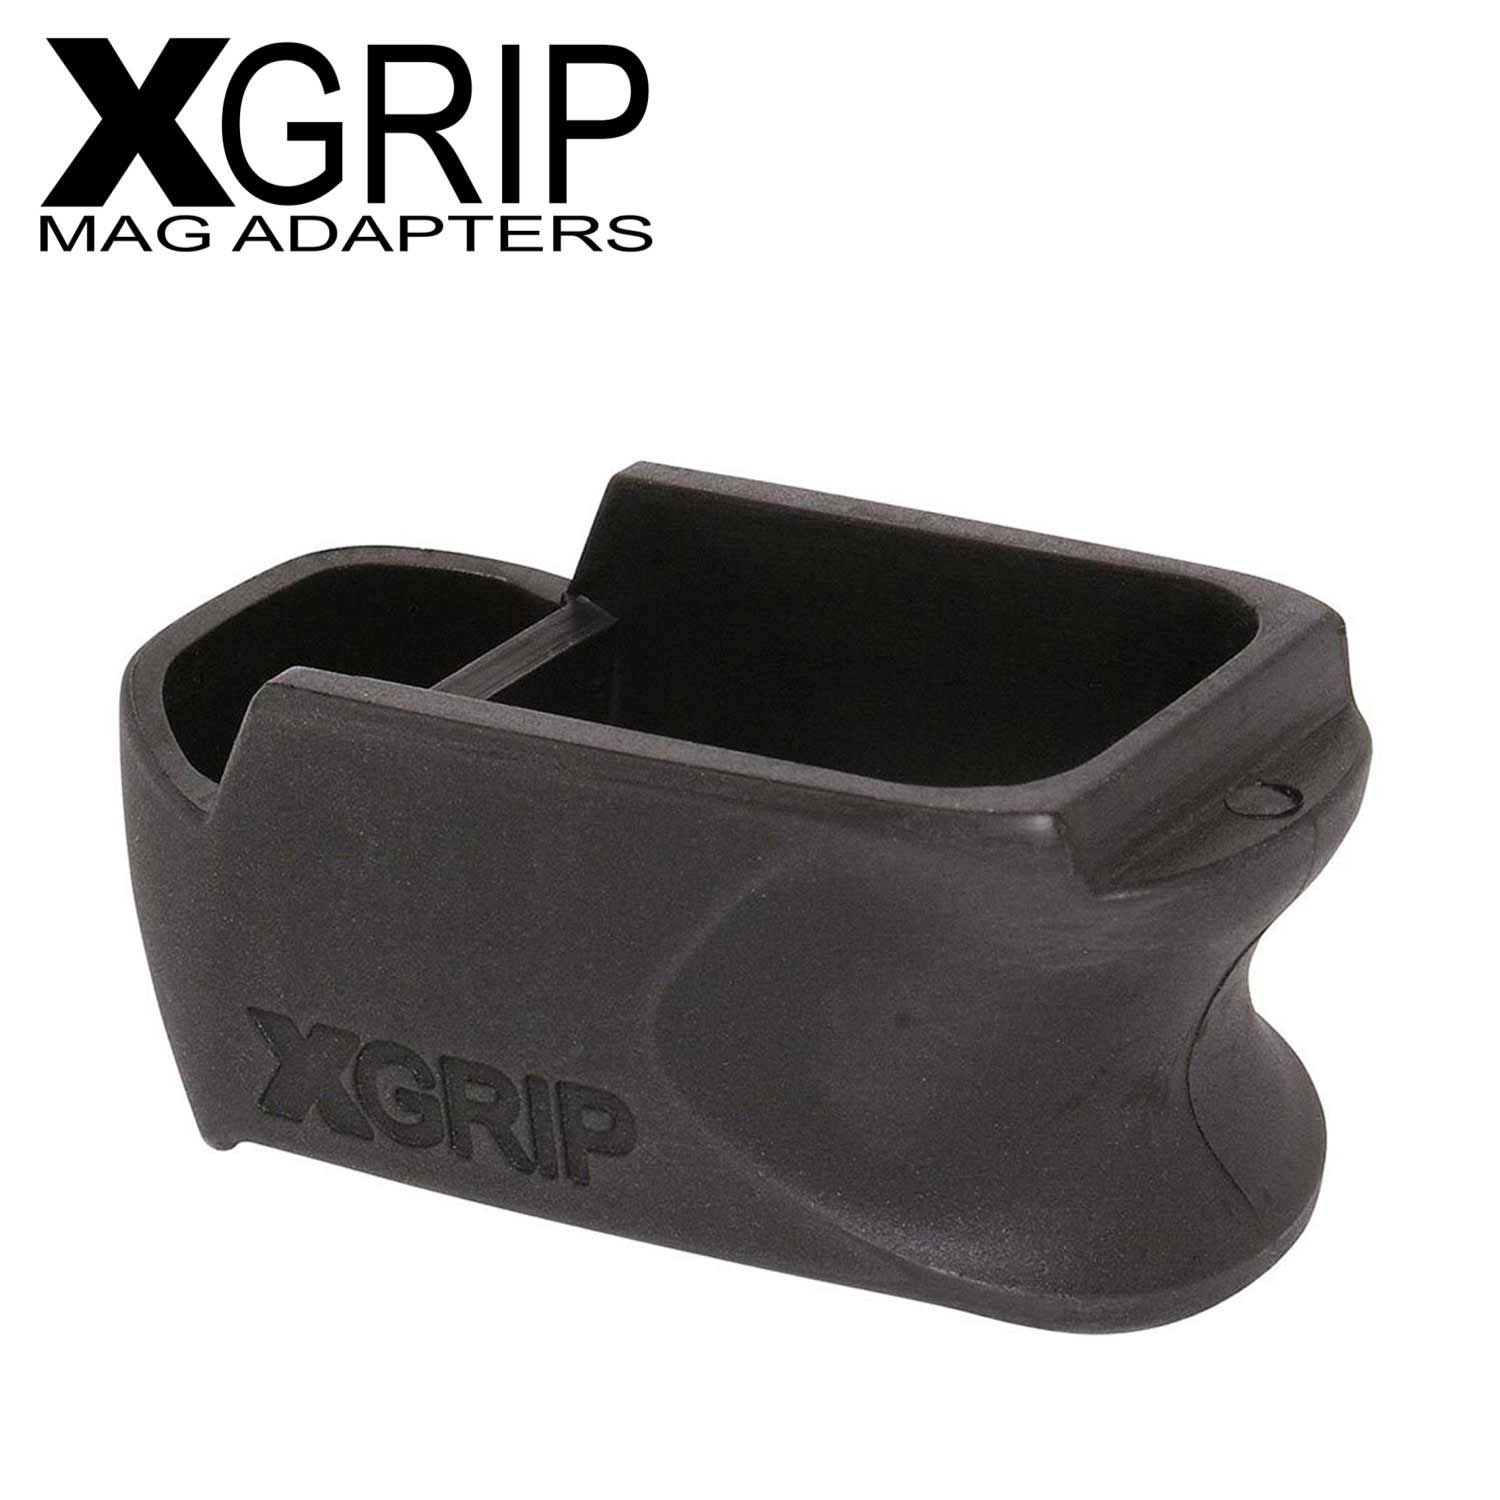 X-GRIP Magazine Adapter for Glock G19, G23, G32 to G26, G27 and G33: MGW